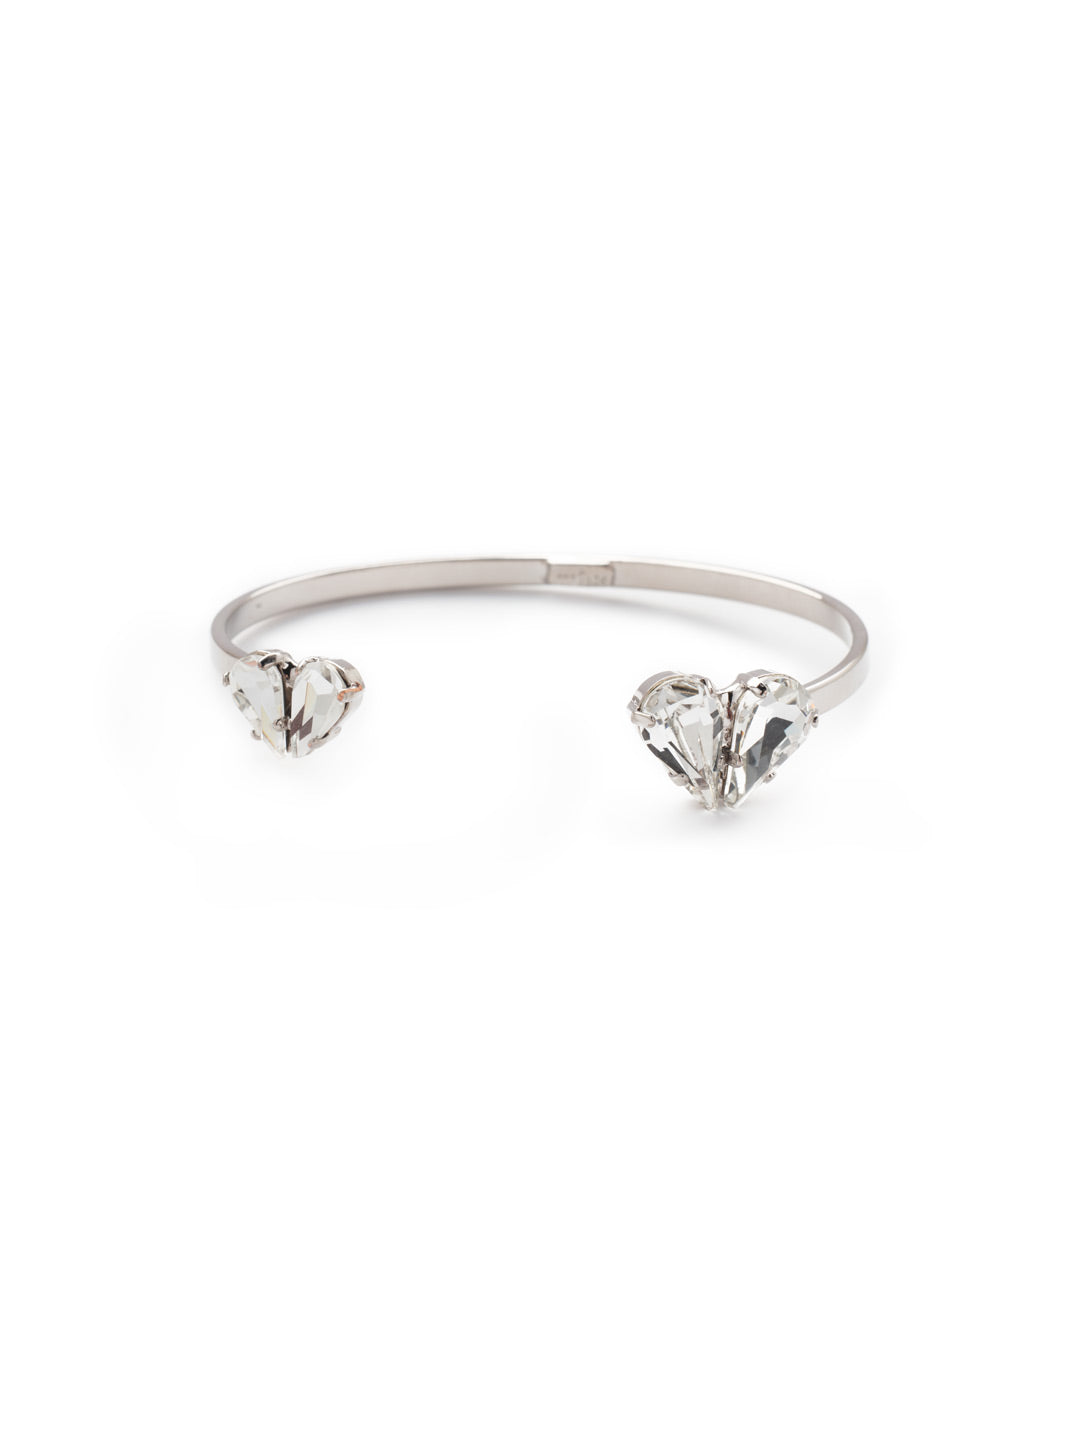 Laila Cuff Bracelet - BEW34PDCRY - <p>Double up on heart-shaped crystal sparkle with our Laila Cuff Bracelet. Just slip it on, adjust to your perfect fit, and go. From Sorrelli's Crystal collection in our Palladium finish.</p>